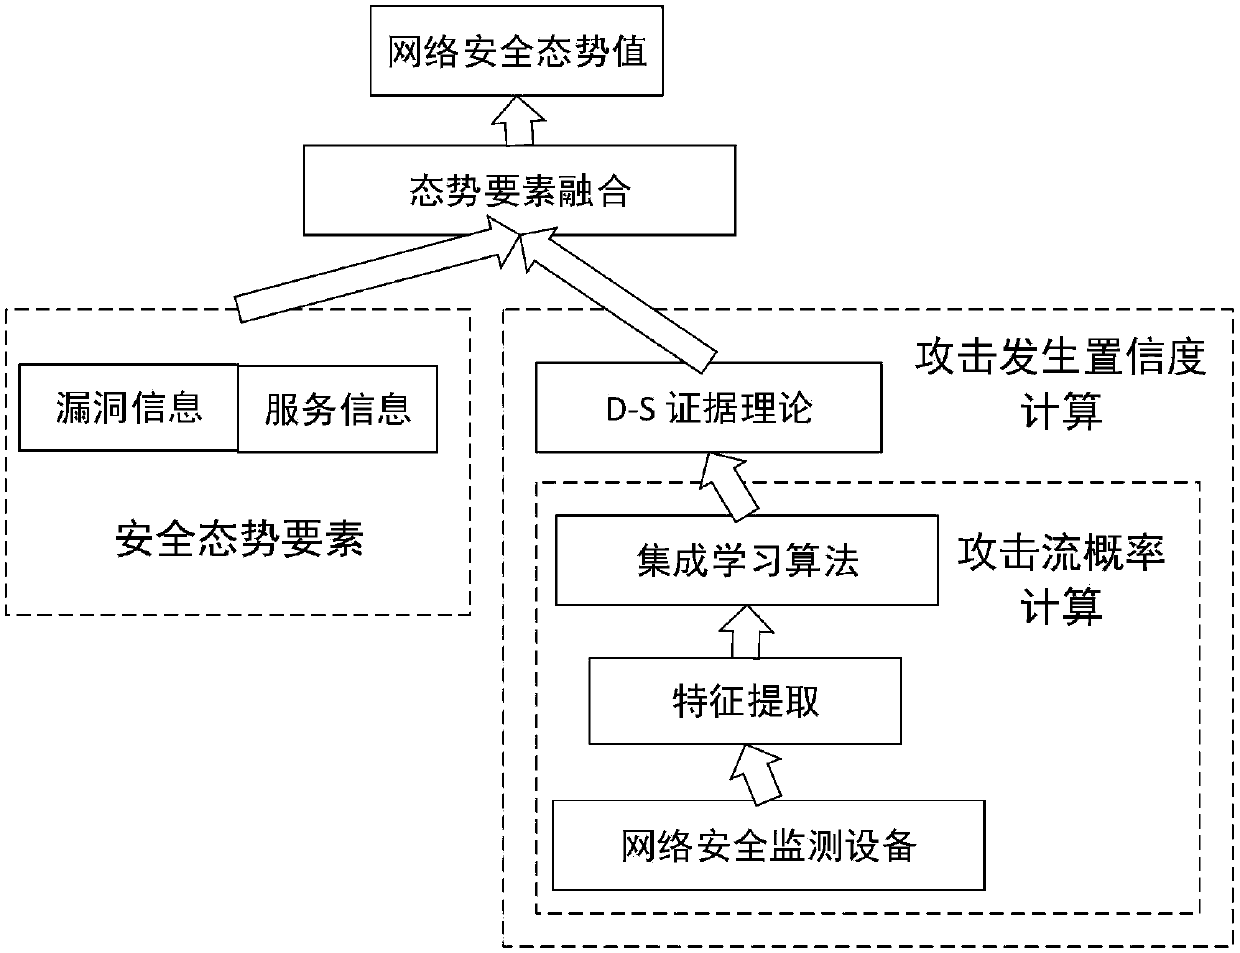 Attack occurrence confidence-based network security situation assessment method and system